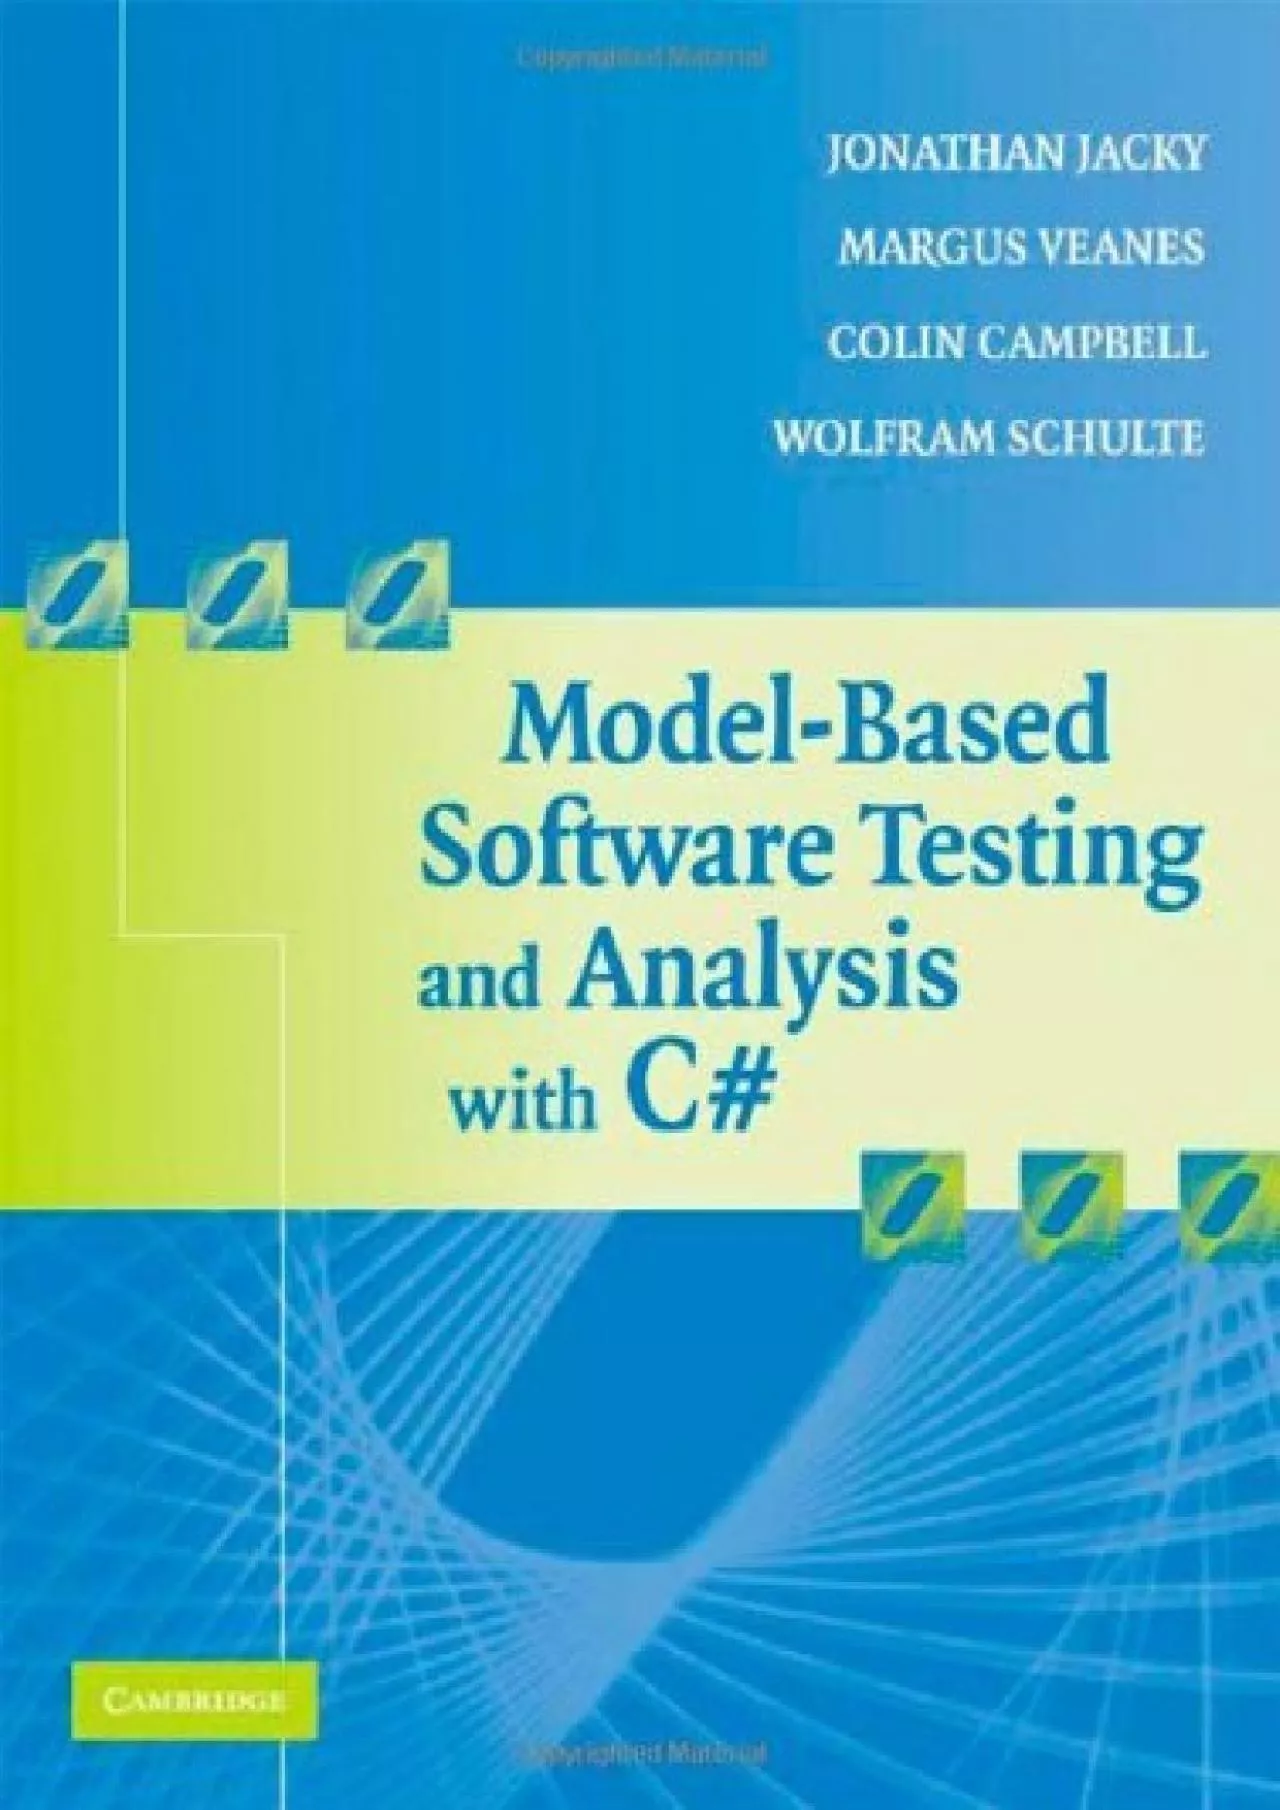 [READ]-Model-Based Software Testing and Analysis with C: A Model-Based Approach Using